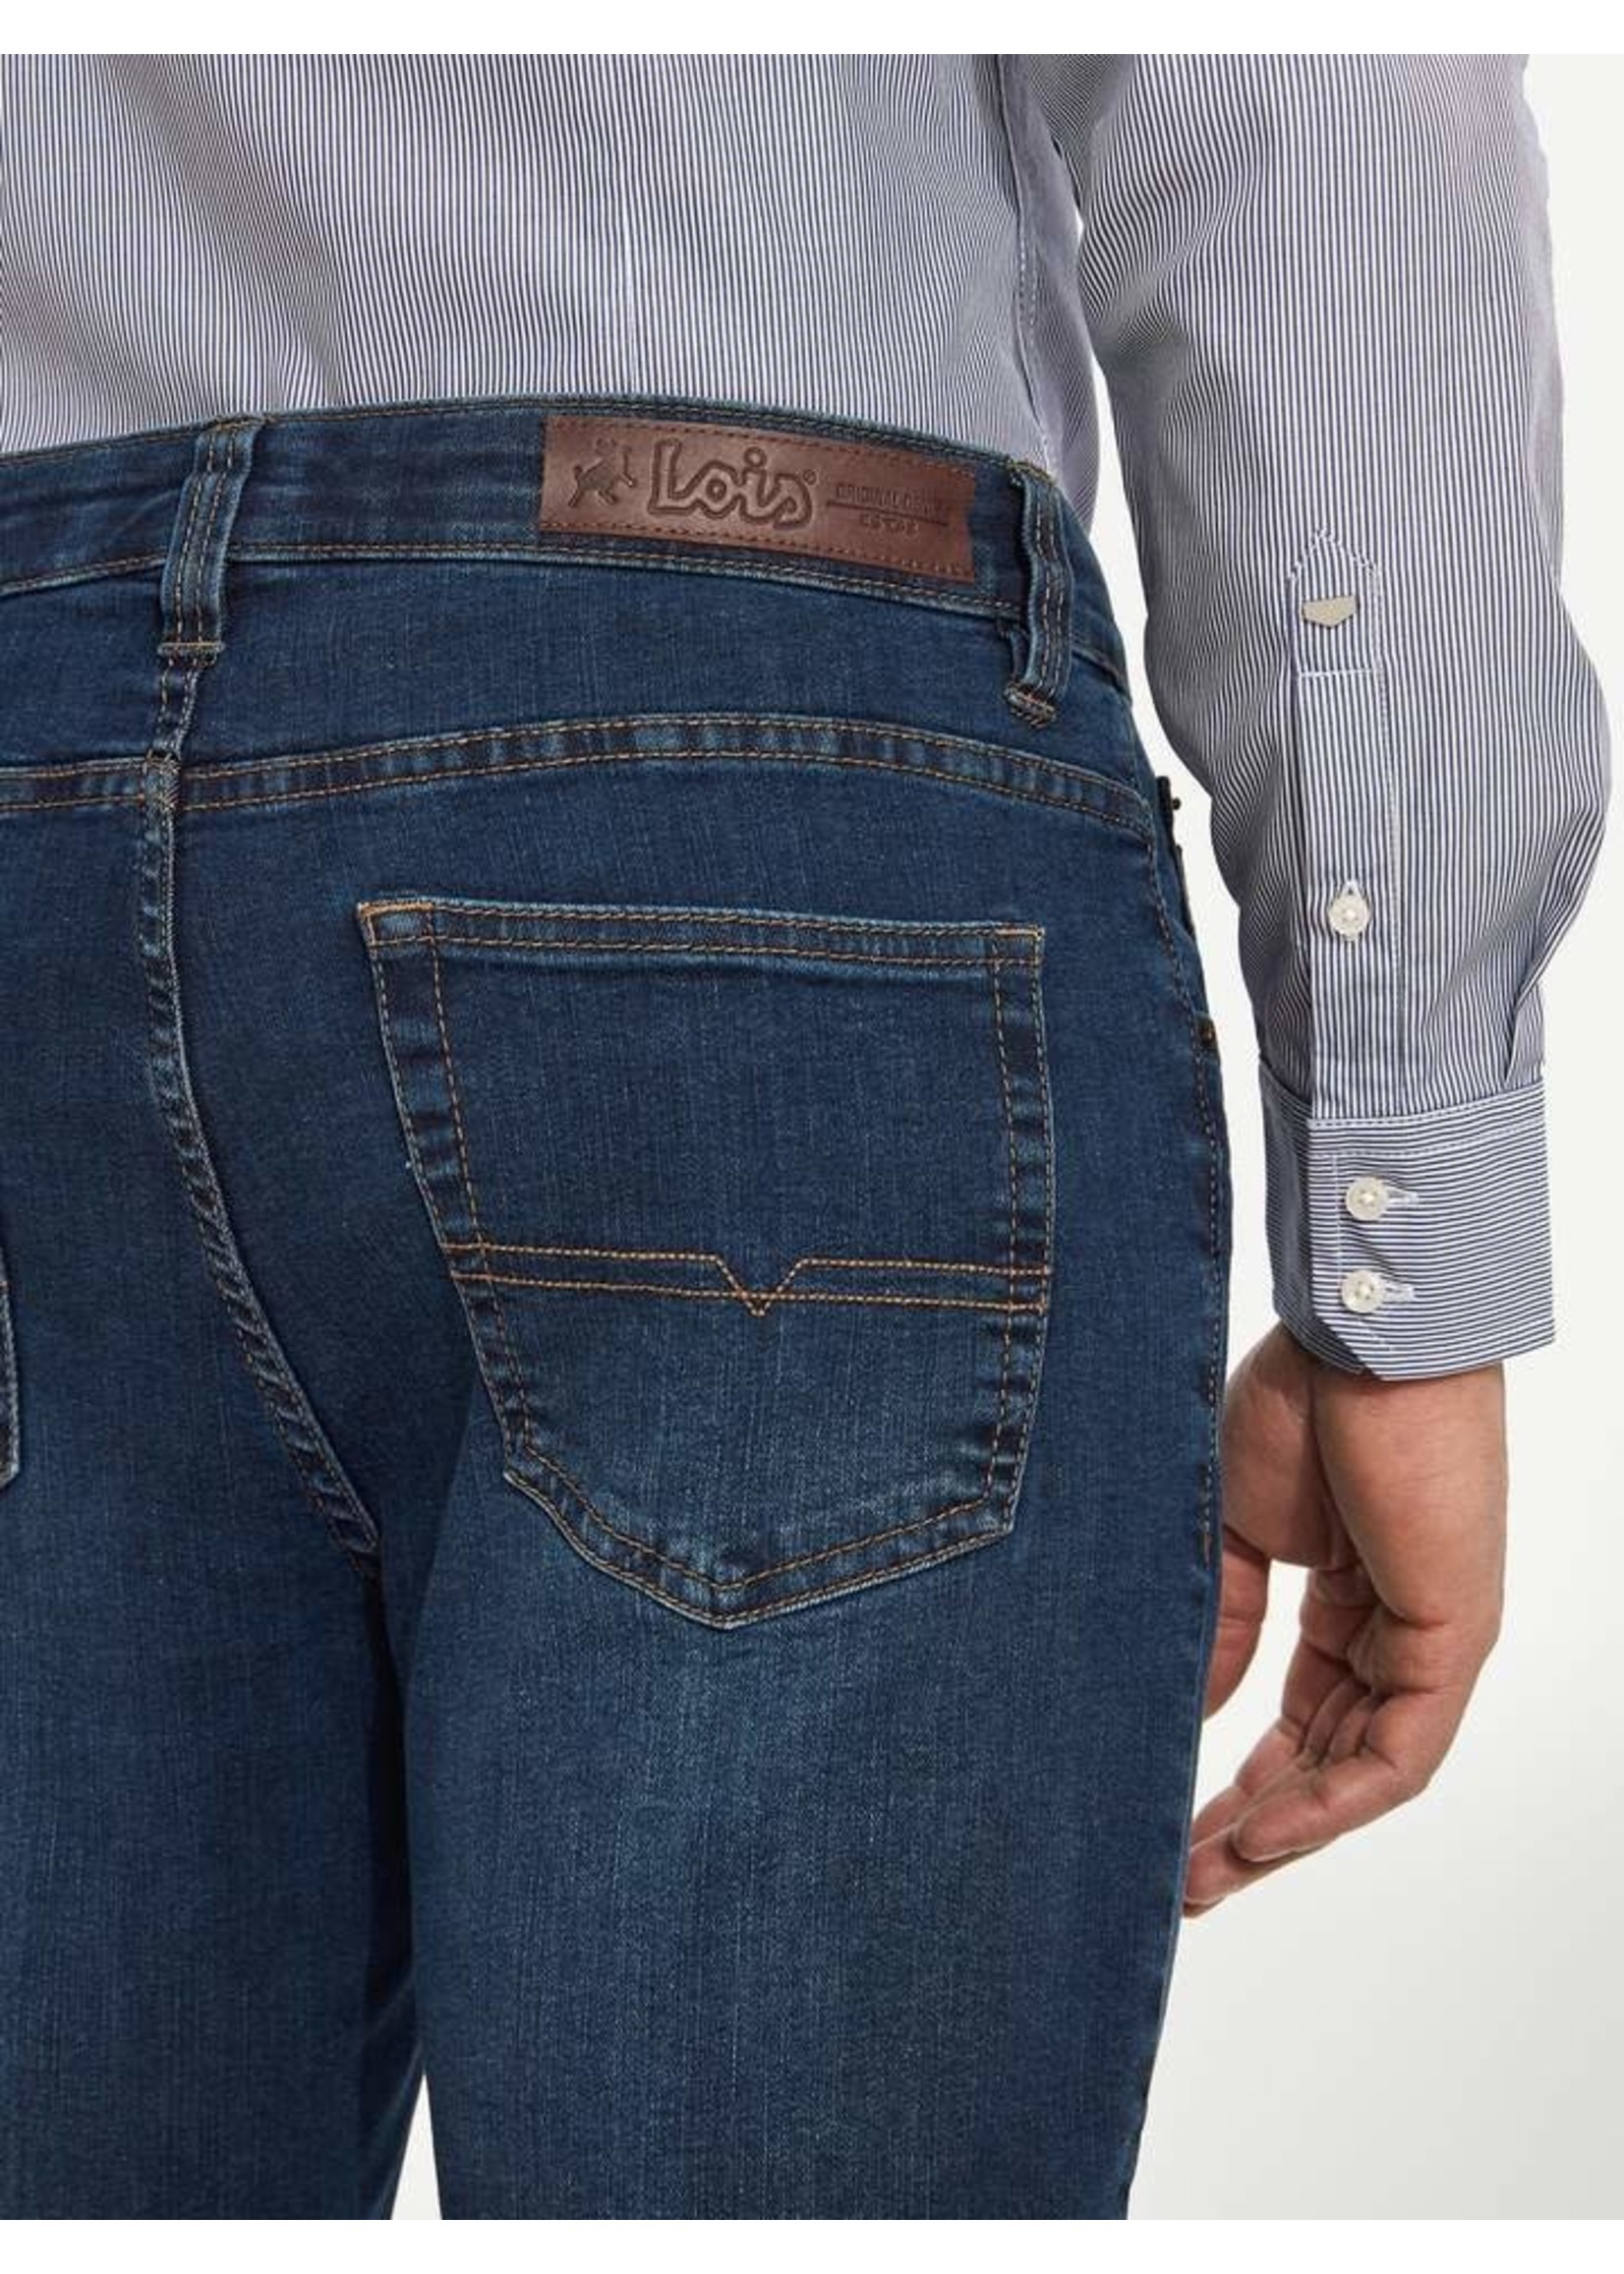 Lois Jeans Canada The "Brad Slim 6252" by Lois Jeans